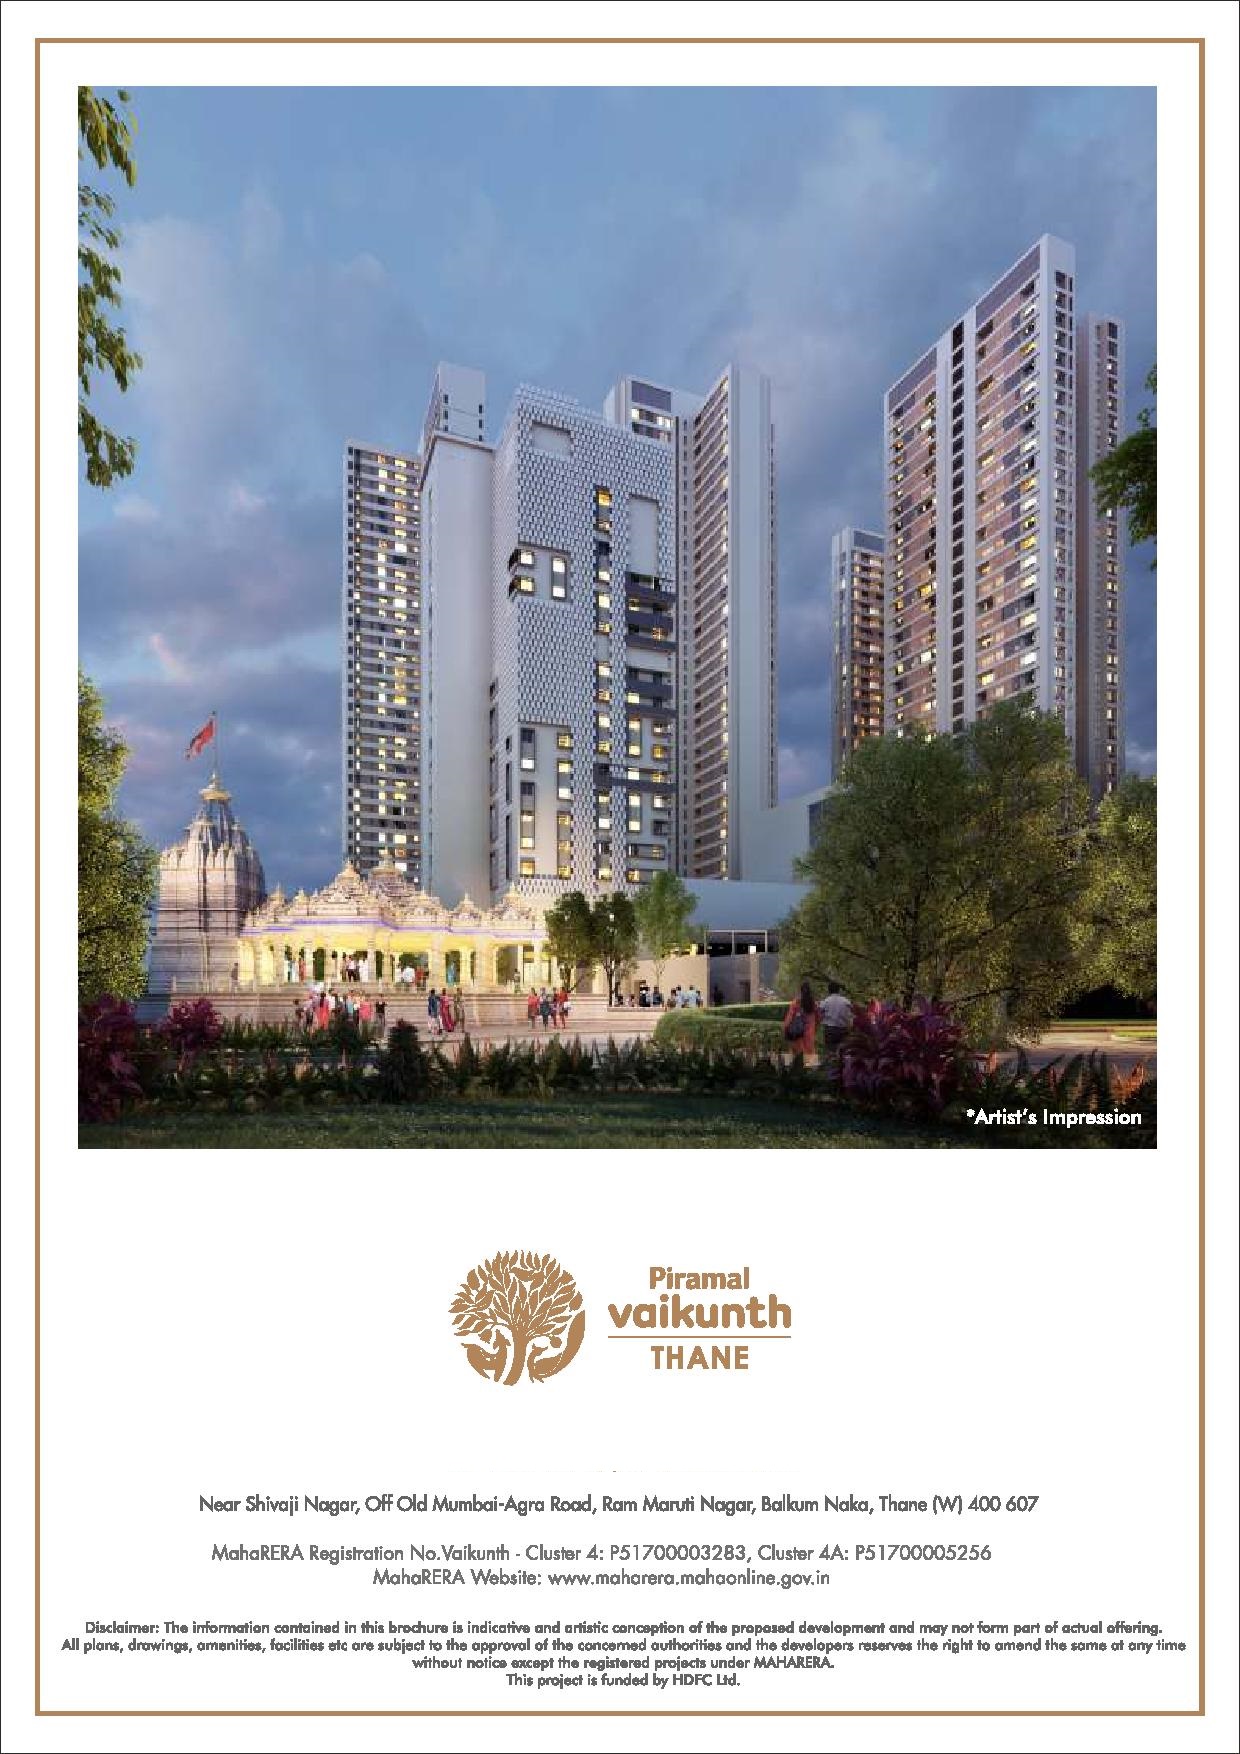 Avail 50% waiver on stamp duty charges at Piramal Vaikunth in Mumbai Update